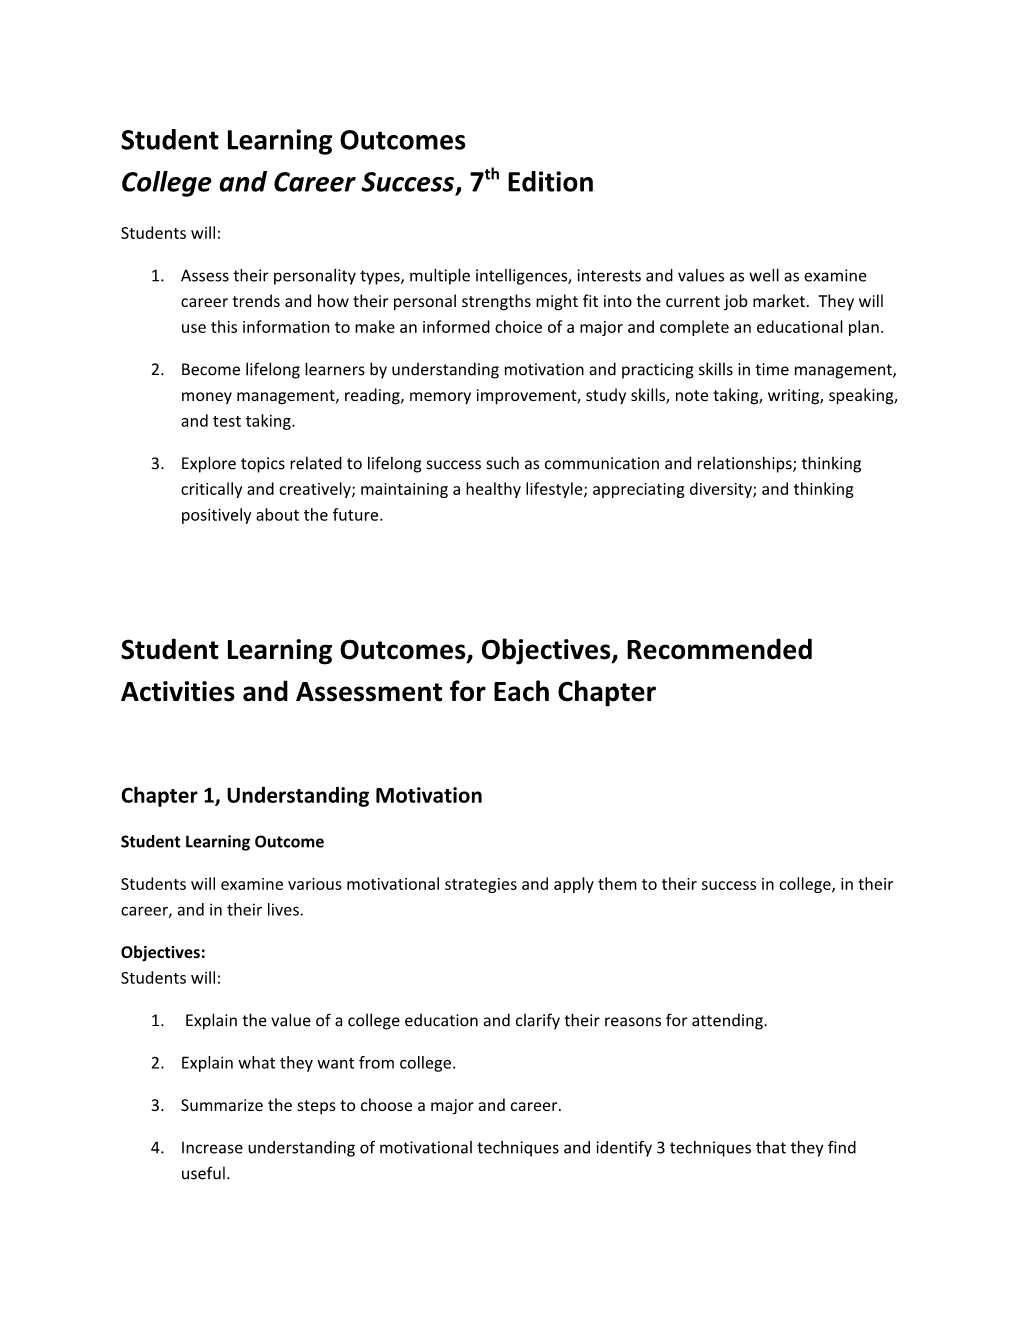 Student Learning Outcomes College and Career Success, 7Th Edition